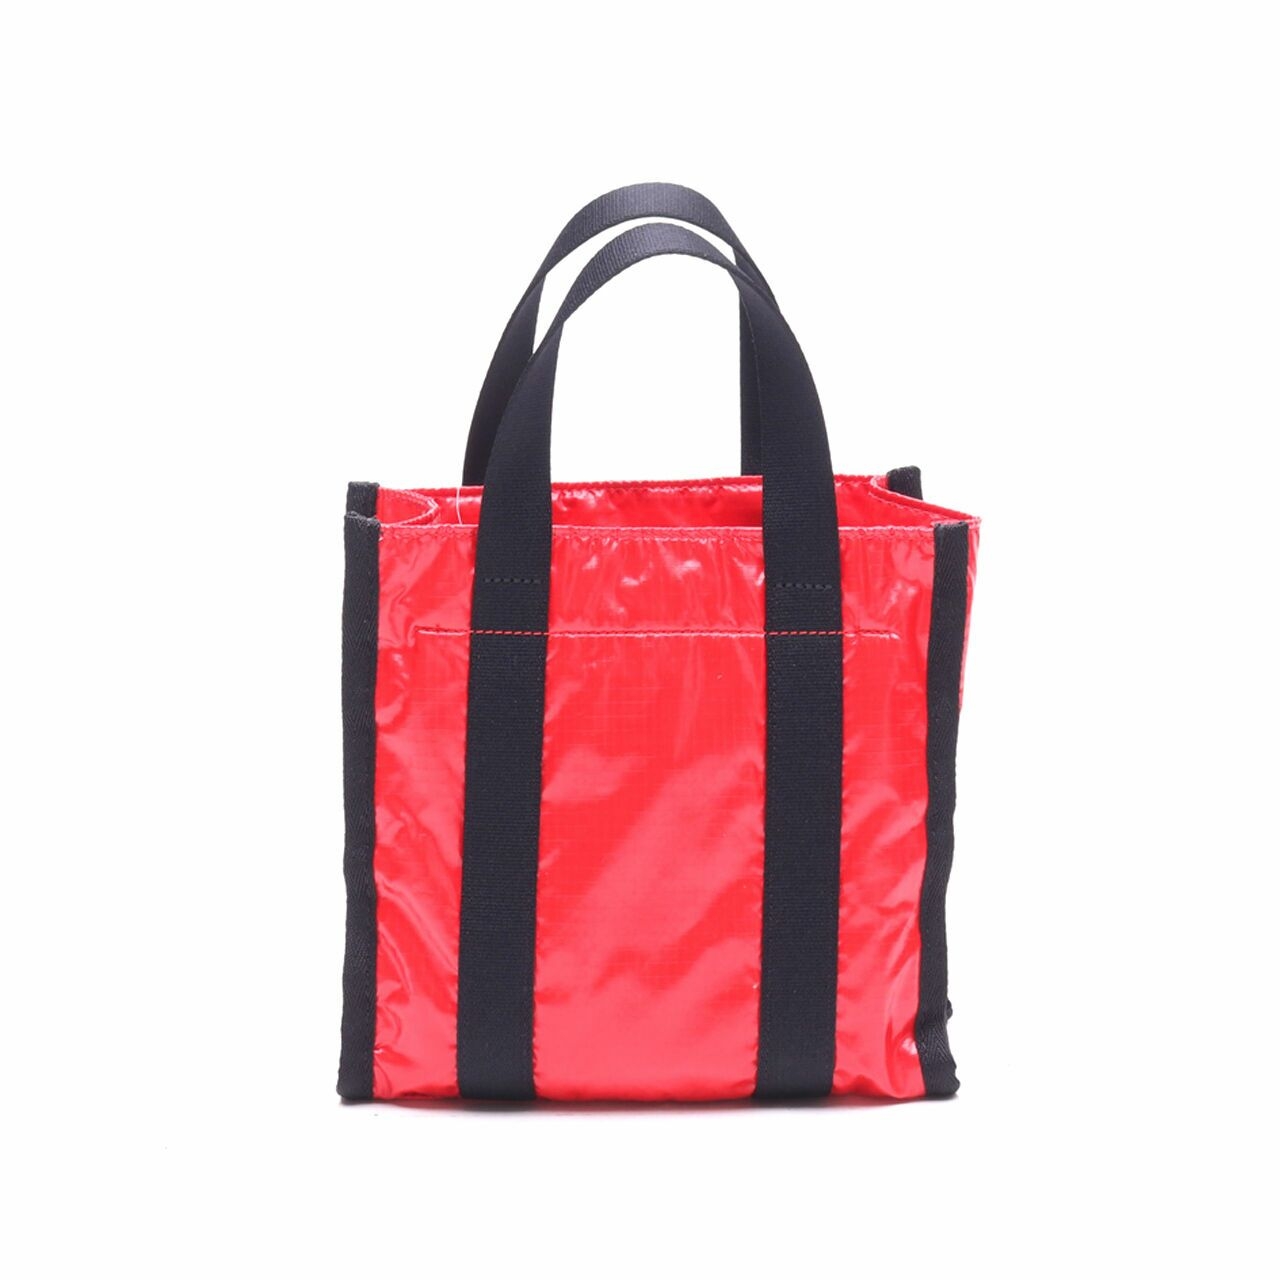 The Marc Jacobs Ripstop Red Mini Tote Bag